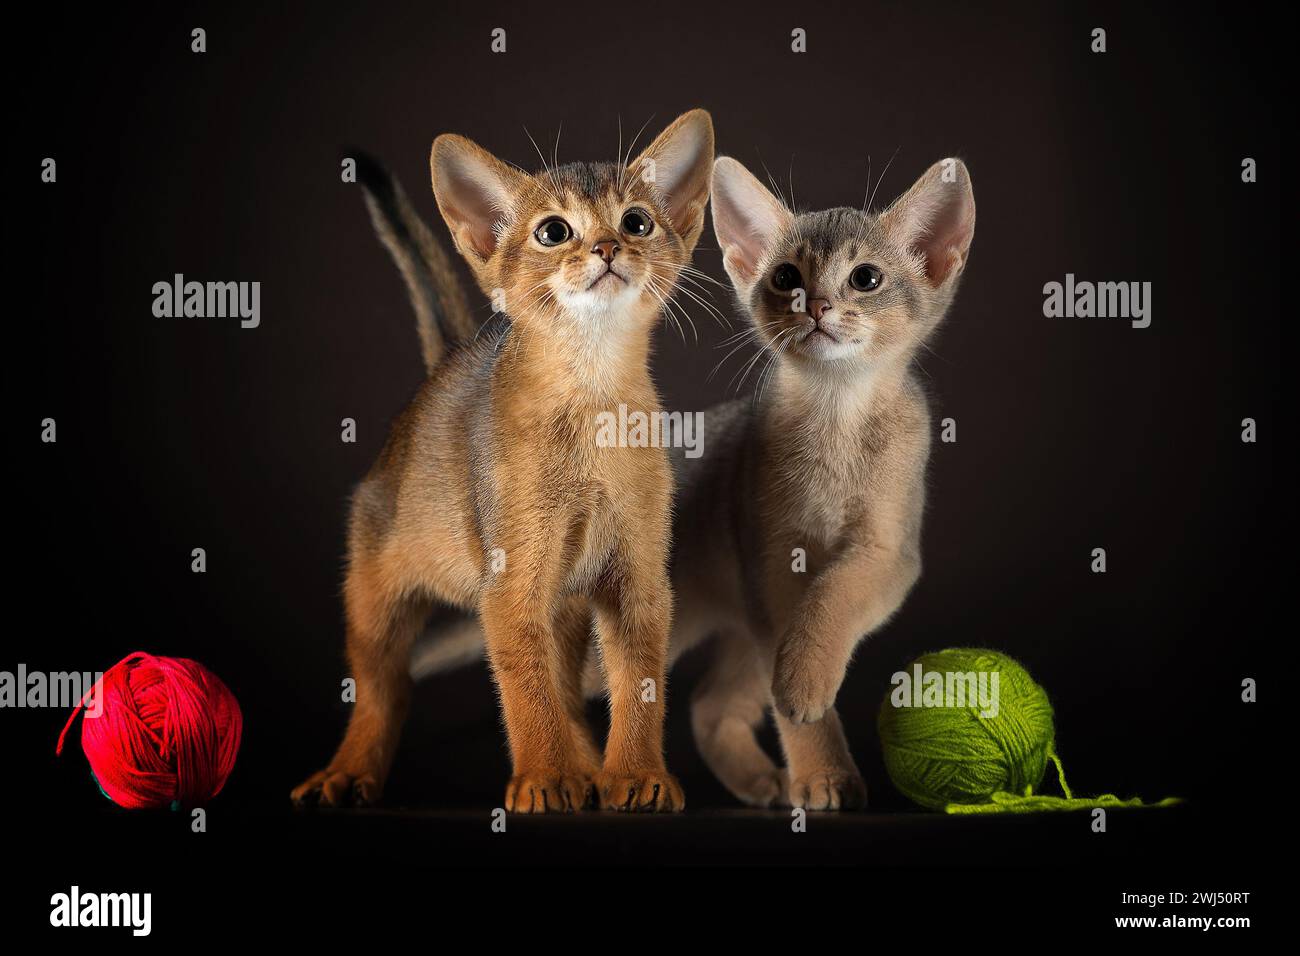 Well-groomed two kittens of the Abyssinian breed playing with balls of yarn on a dark background Stock Photo